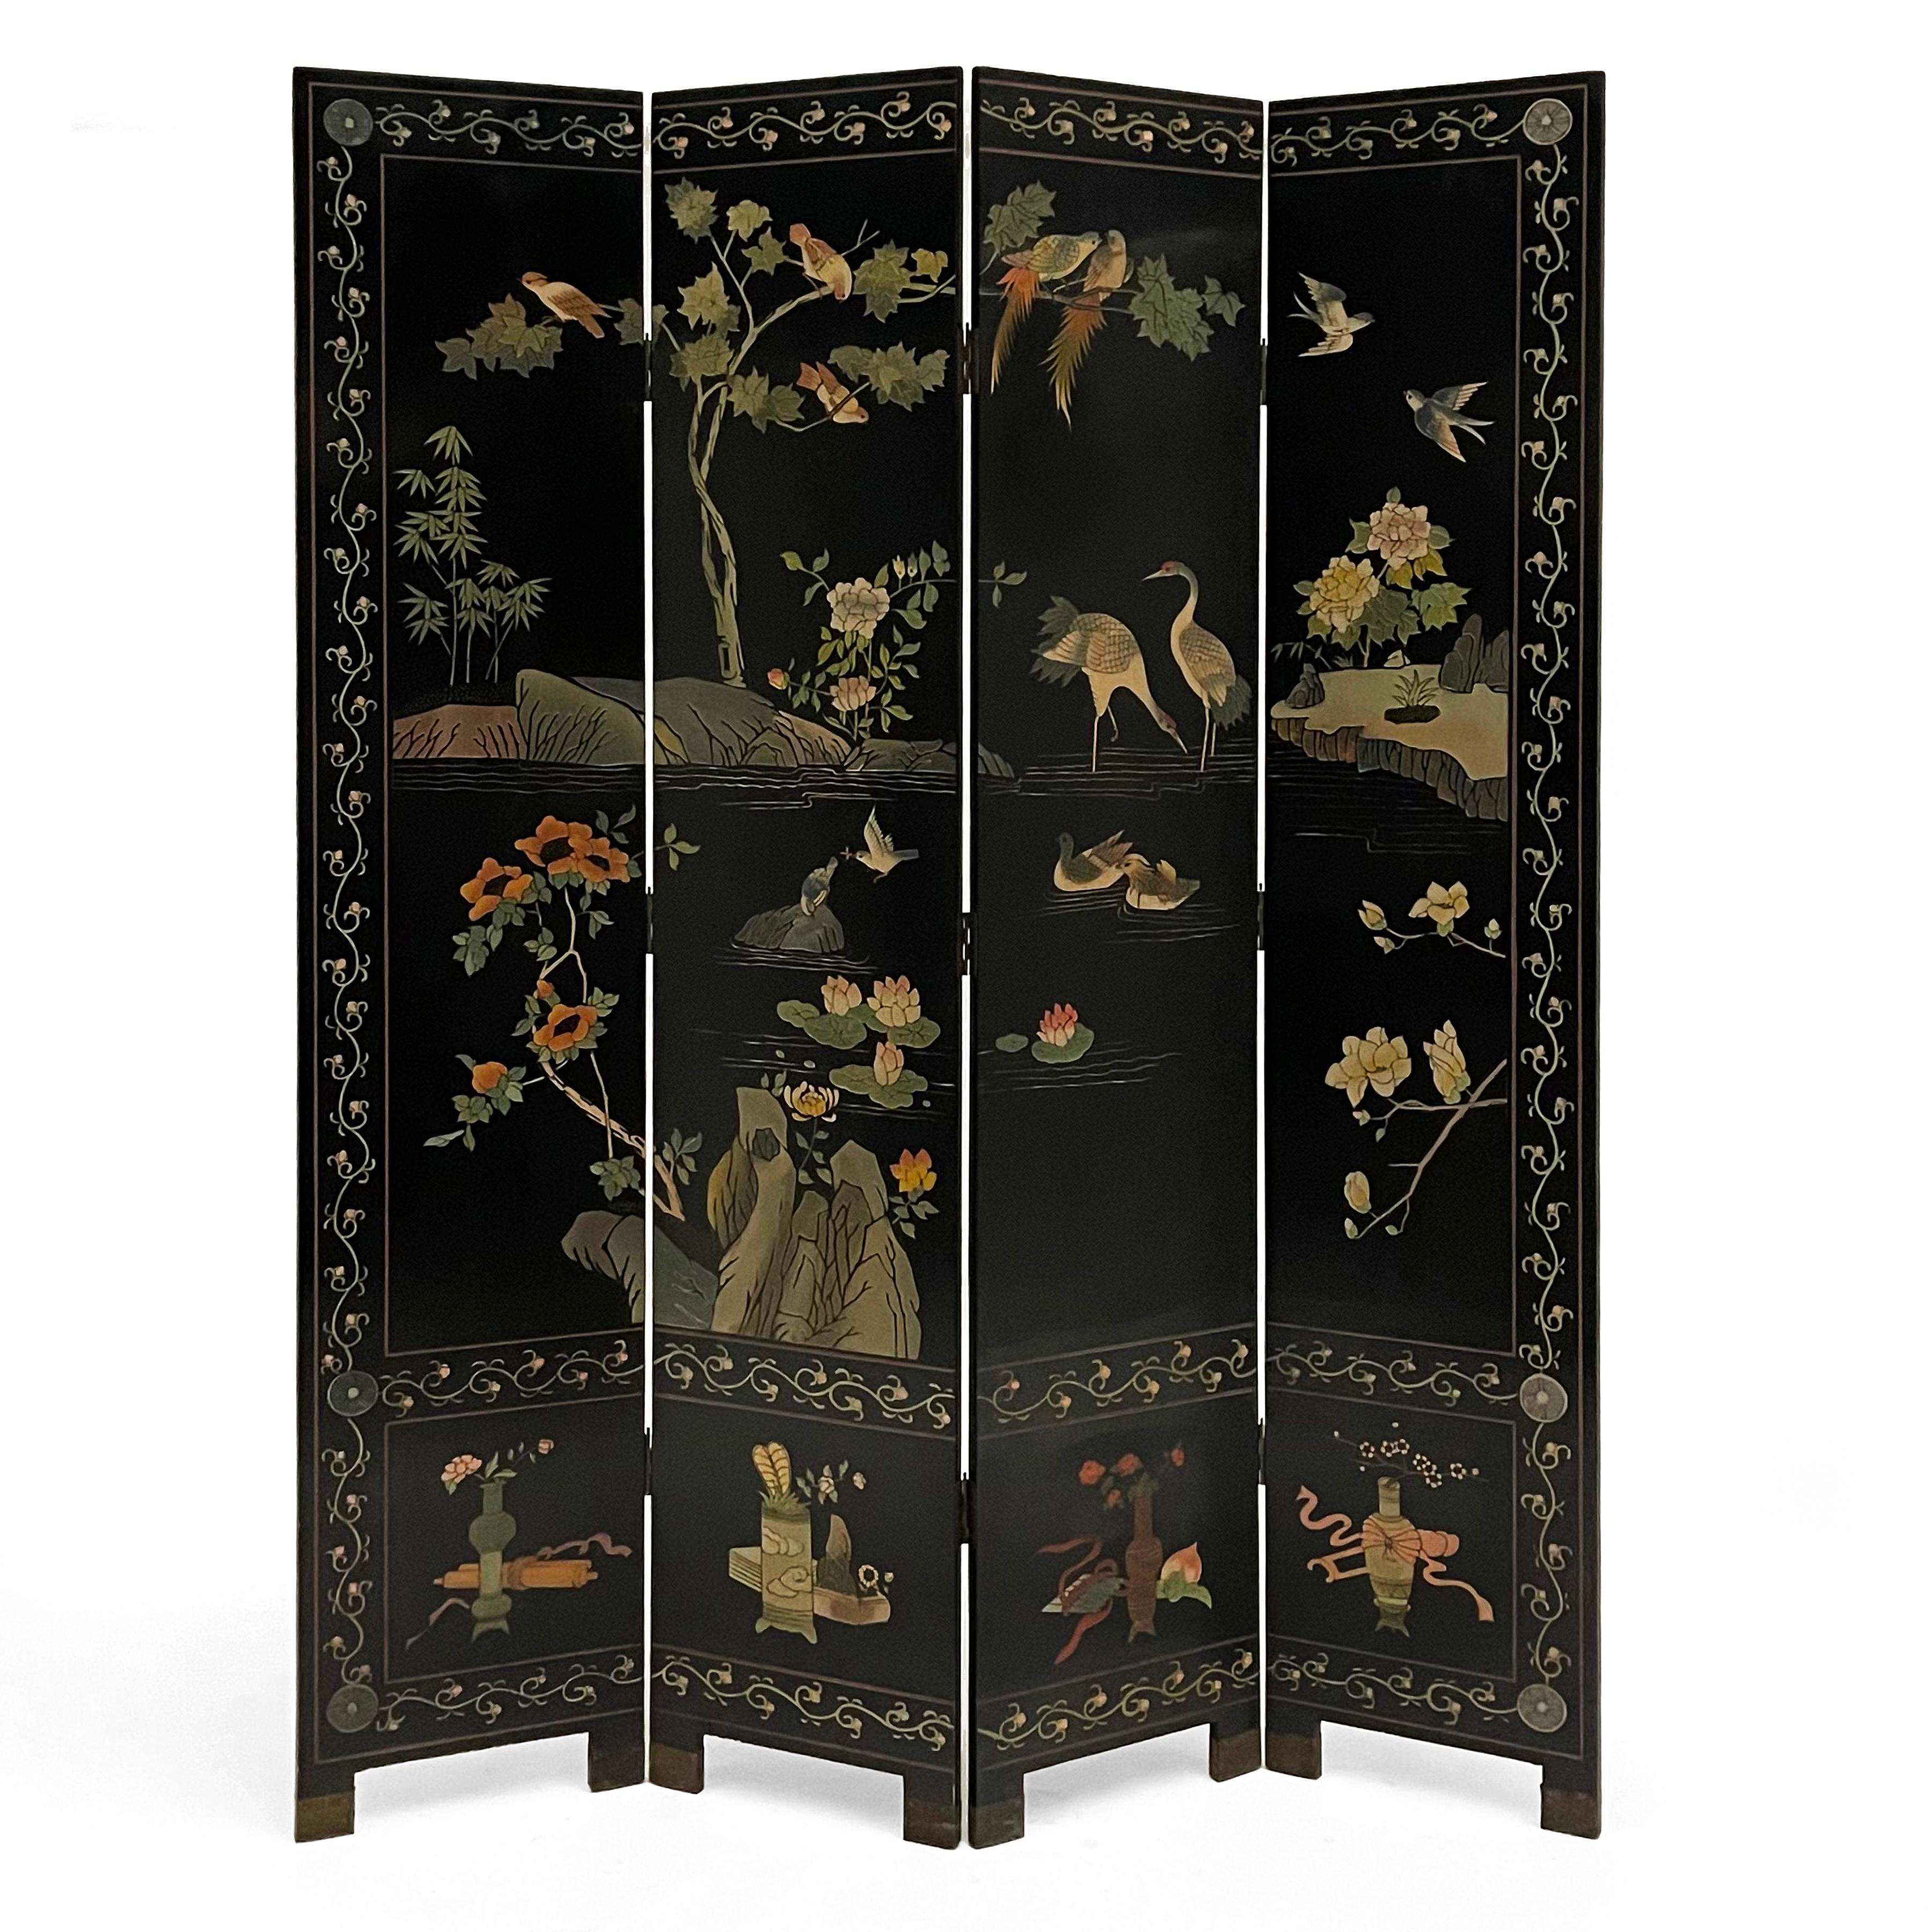 This screen has four panels with brass feet. The front features a tranquil nature scene with a variety of birds bordered by a pattern flowering vine with four different antique vases with flowers at the bottom, while the back shows two white cranes